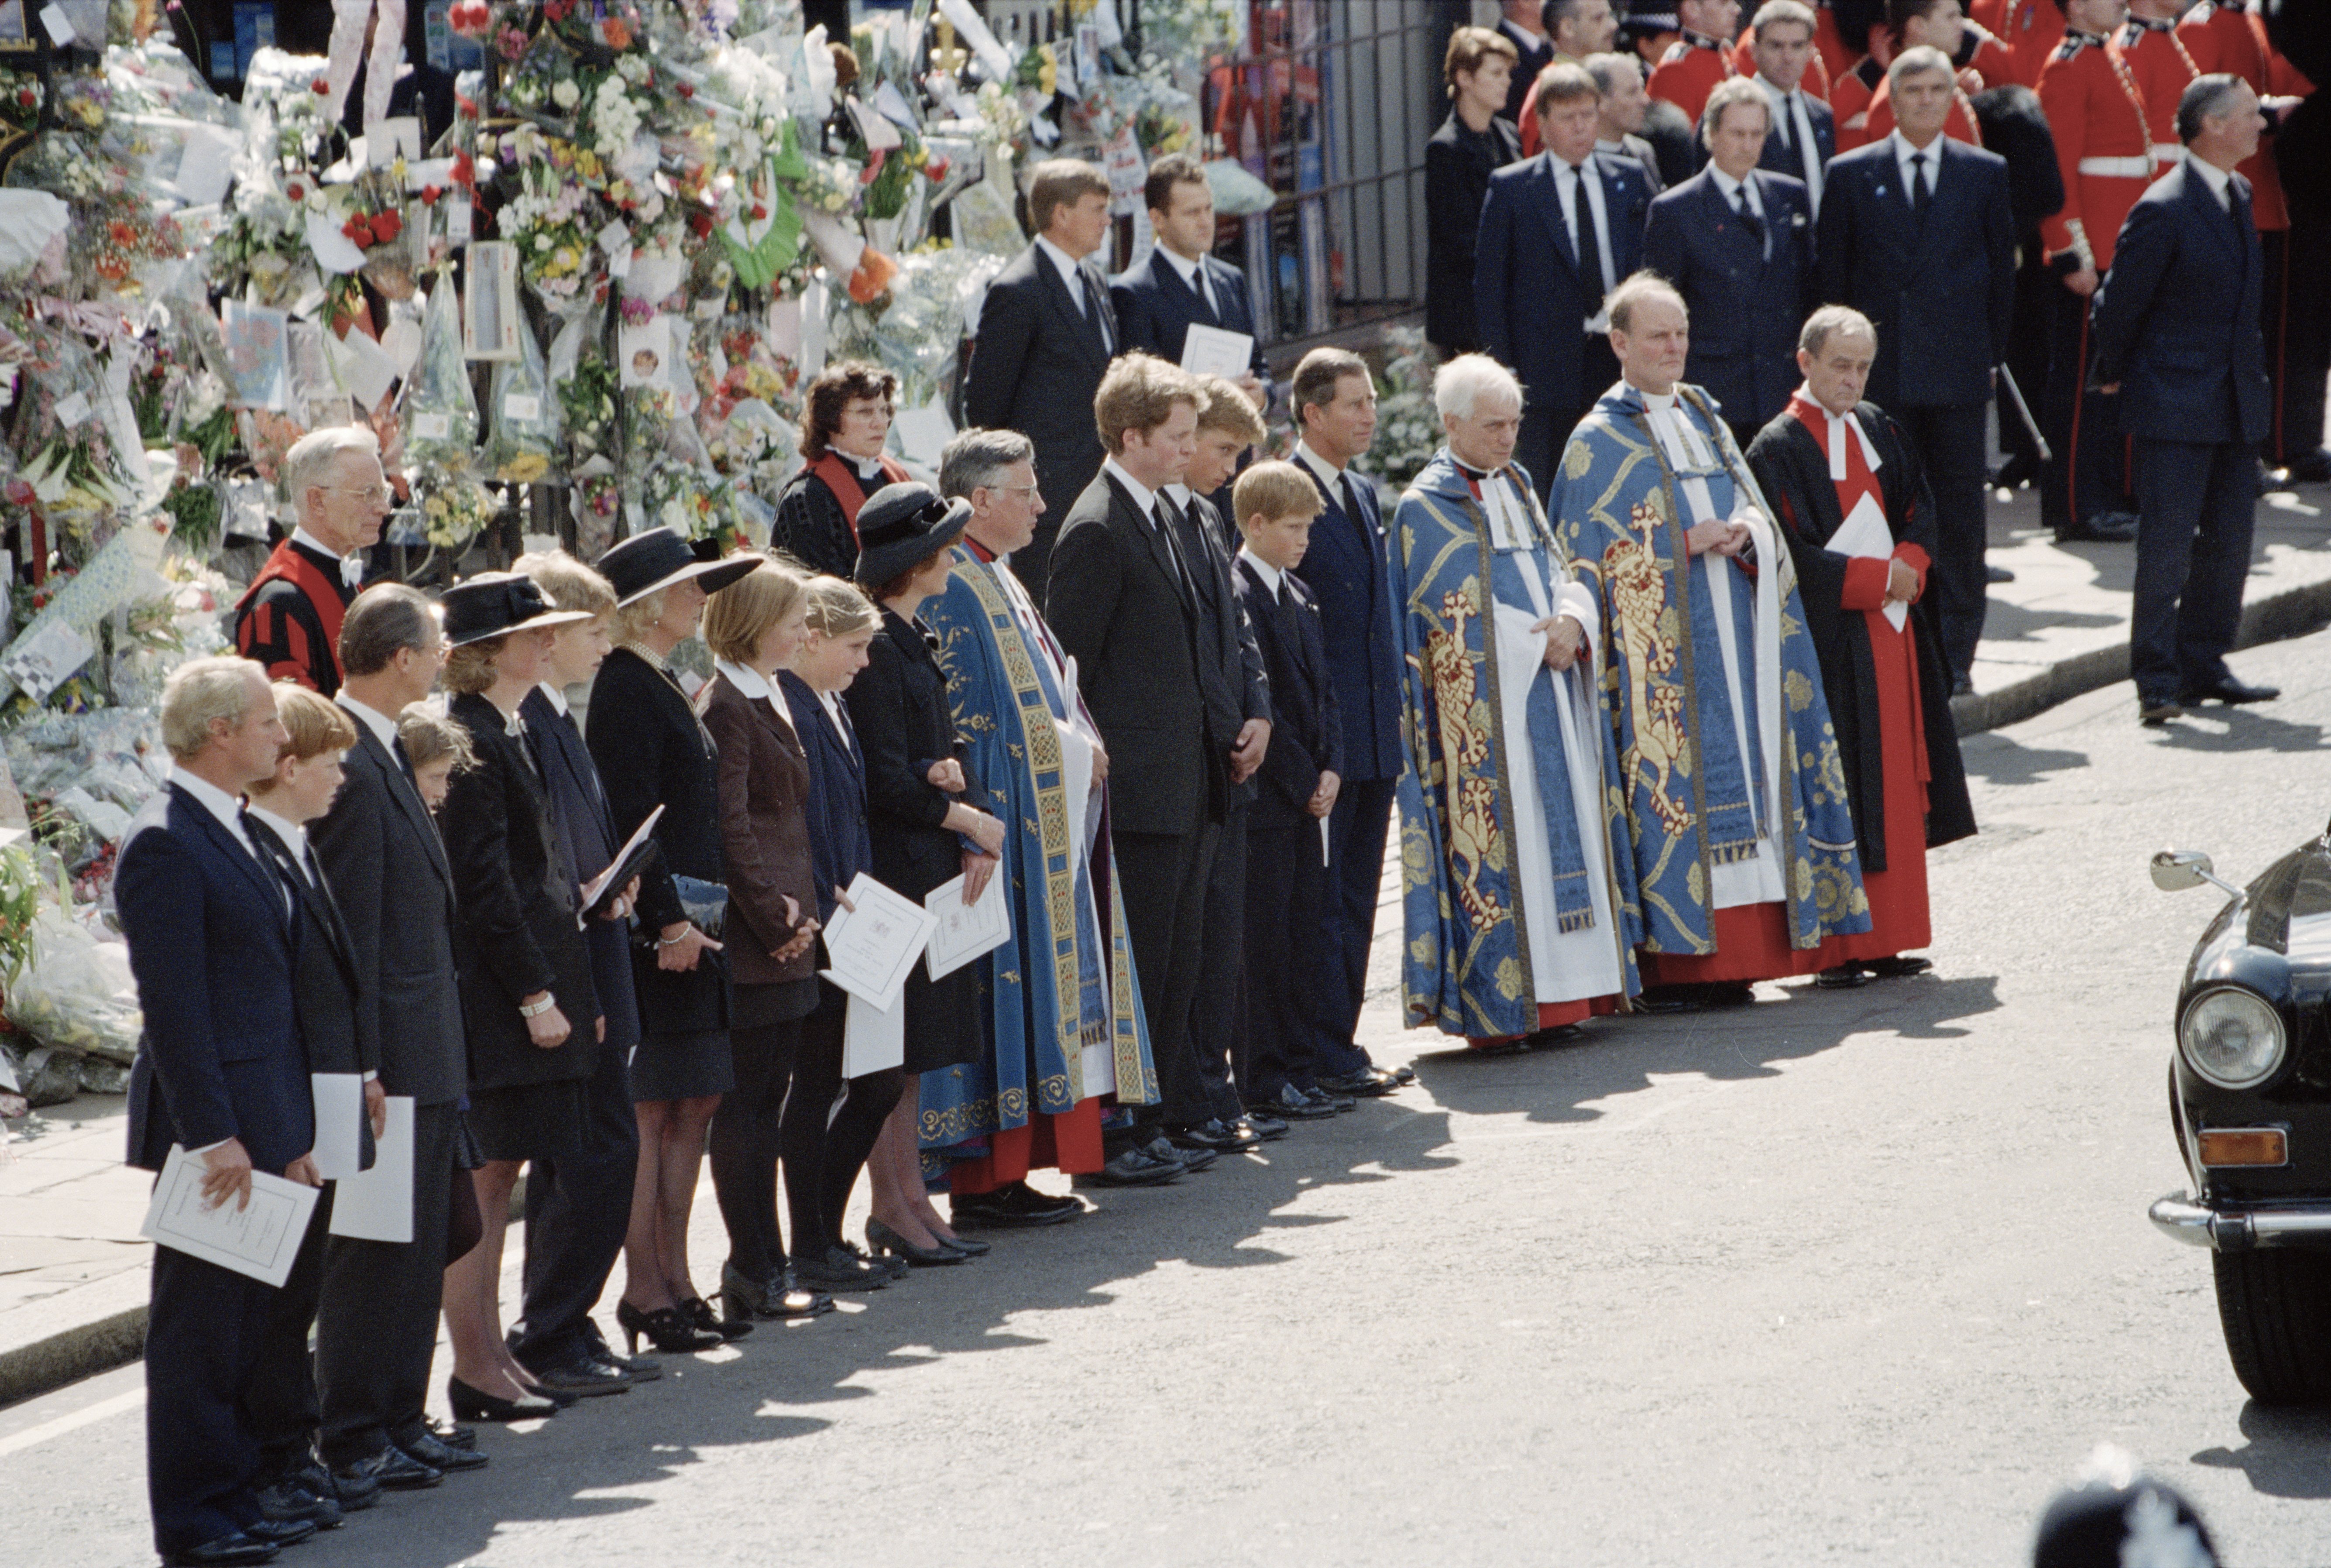 The funeral of Diana, Princess of Wales at Westminster Abbey in London,  September 6, 1997. The line-up of family members as the coffin leaves the Abbey after the ceremony. | Source: Getty Images